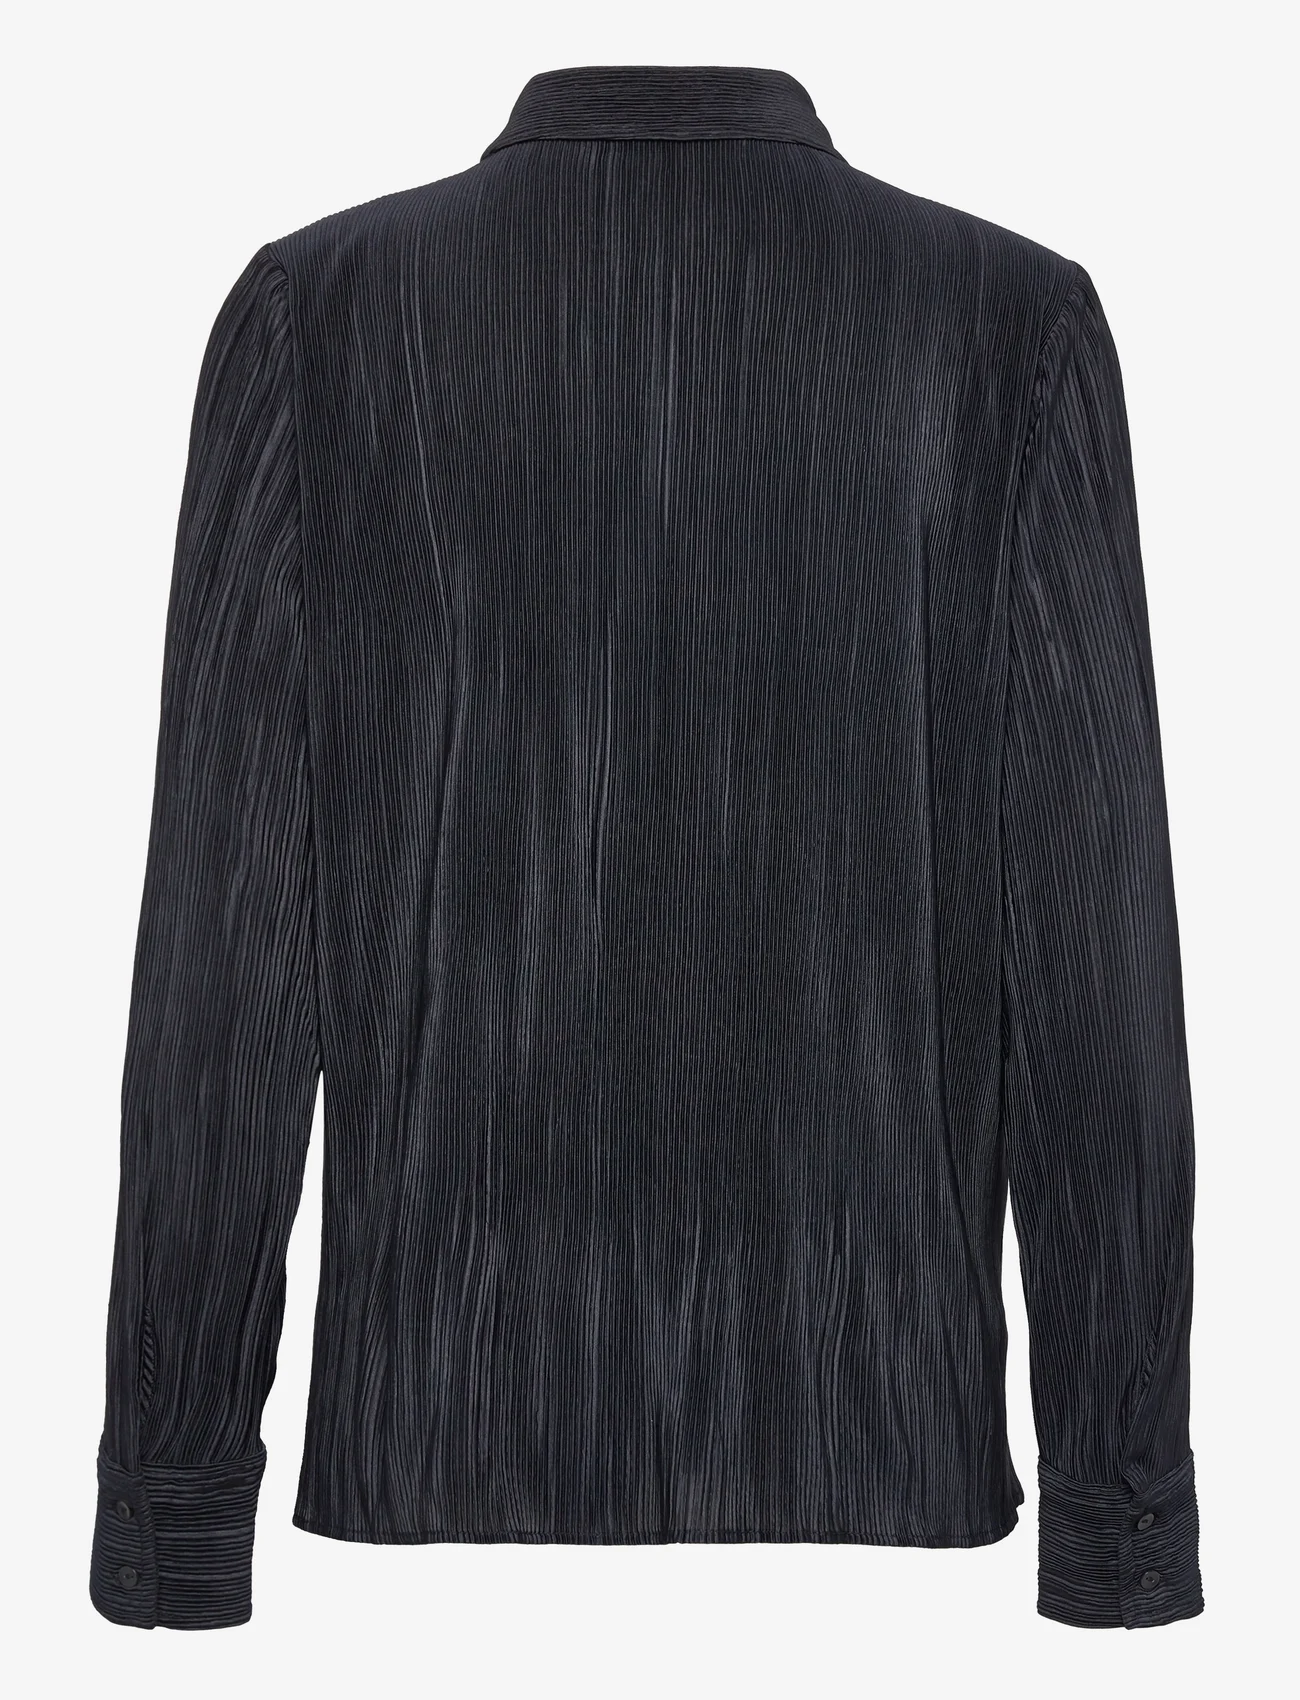 Abercrombie & Fitch - ANF WOMENS WOVENS - long-sleeved shirts - black beuaty - 1